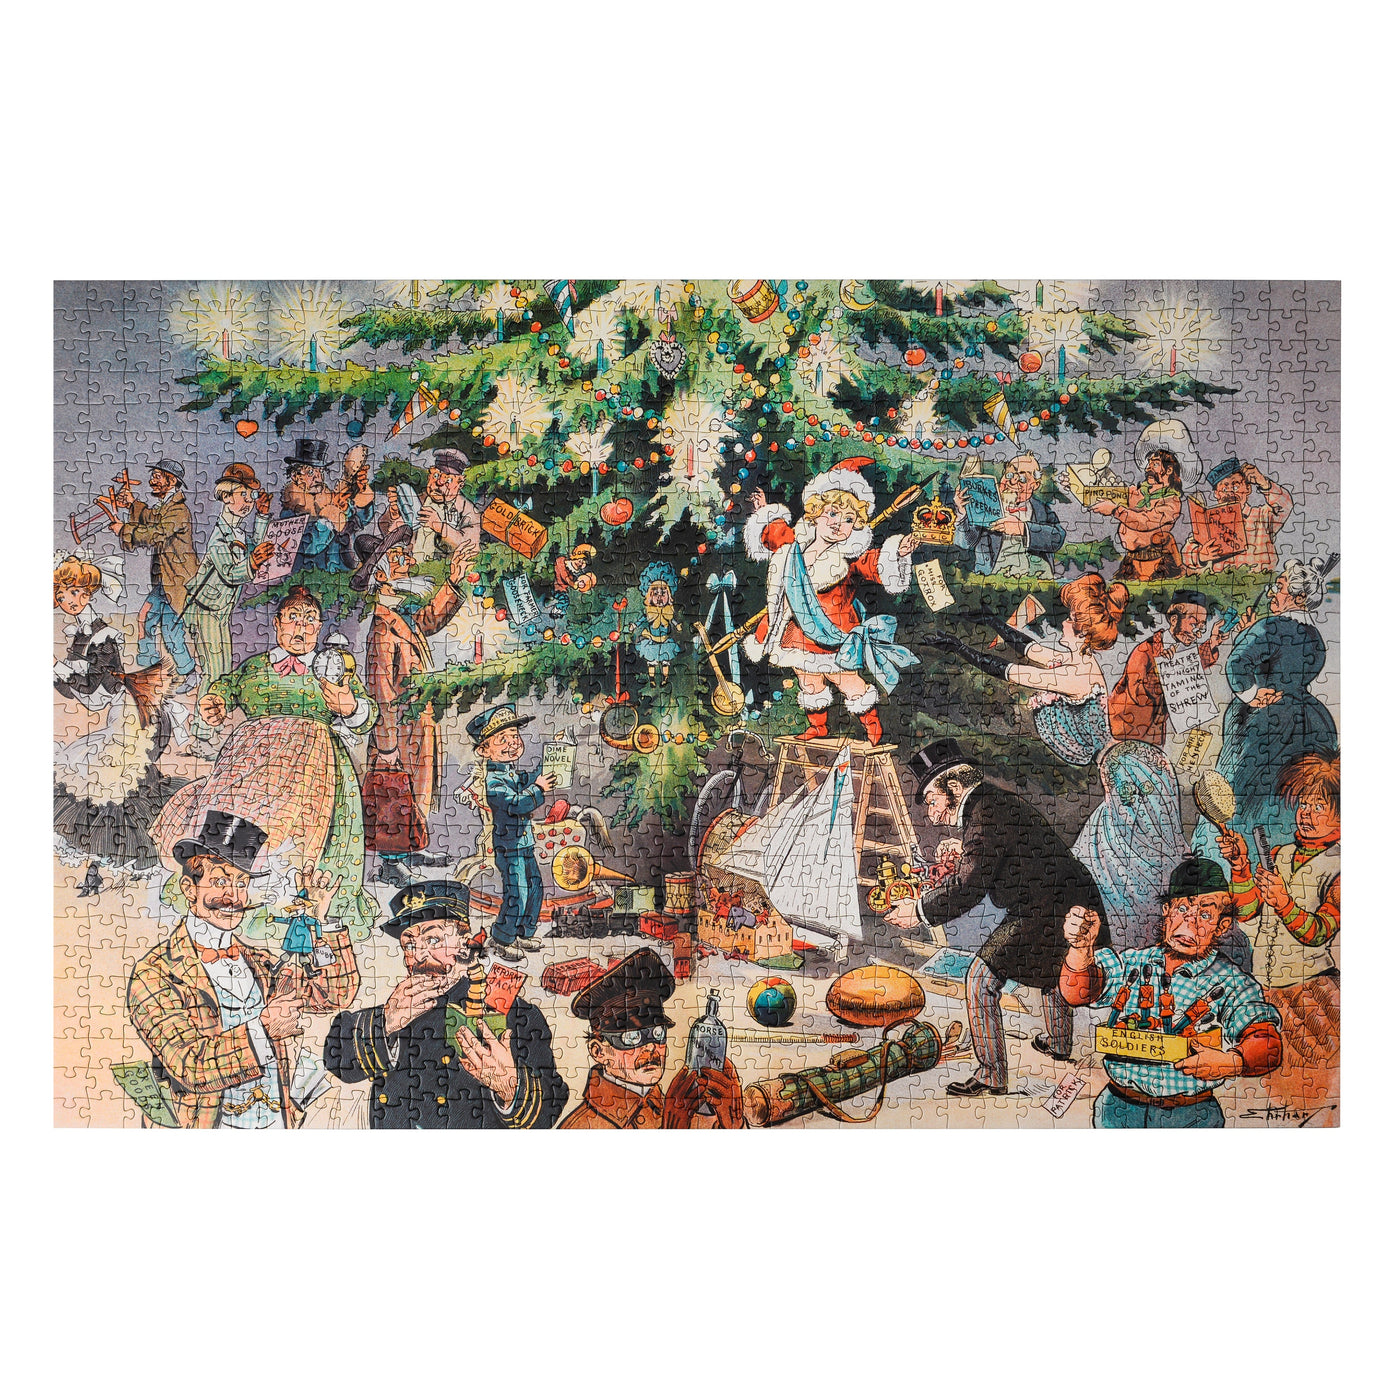 LOOT PARTY | 1,000 Piece Jigsaw Puzzle